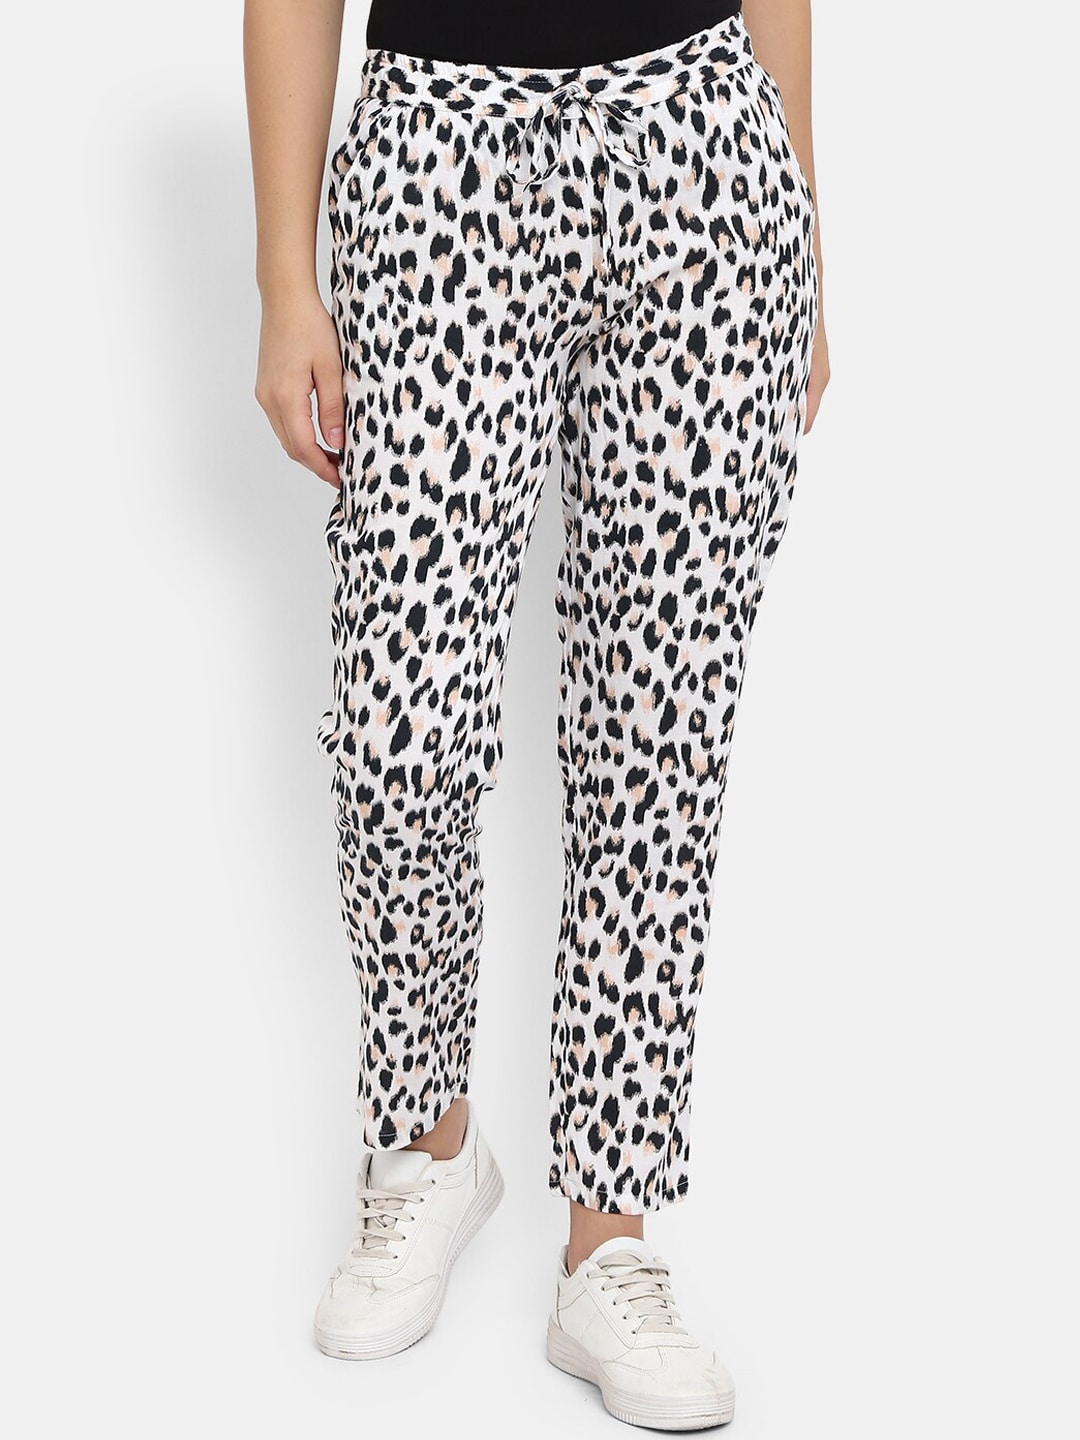 V-Mart Off-White Printed Lounge Pants Price in India